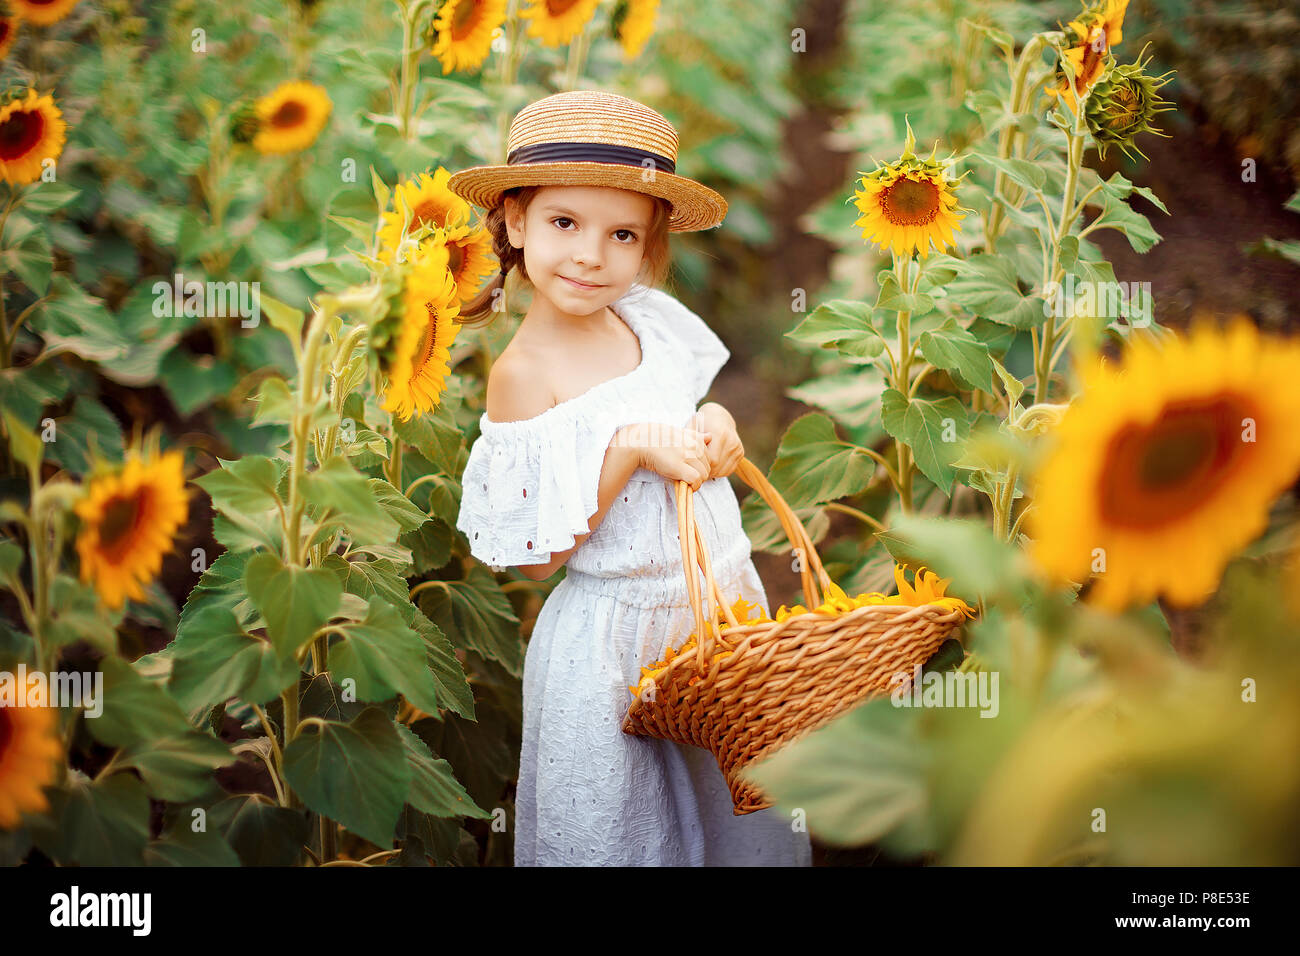 Portrait happy child girl in white dress, straw hat with a basket of sunflowers smiling and looking at camera. Sunny light playing onfield. Family outdoor lifestyle. Summer cozy mood. Stock Photo